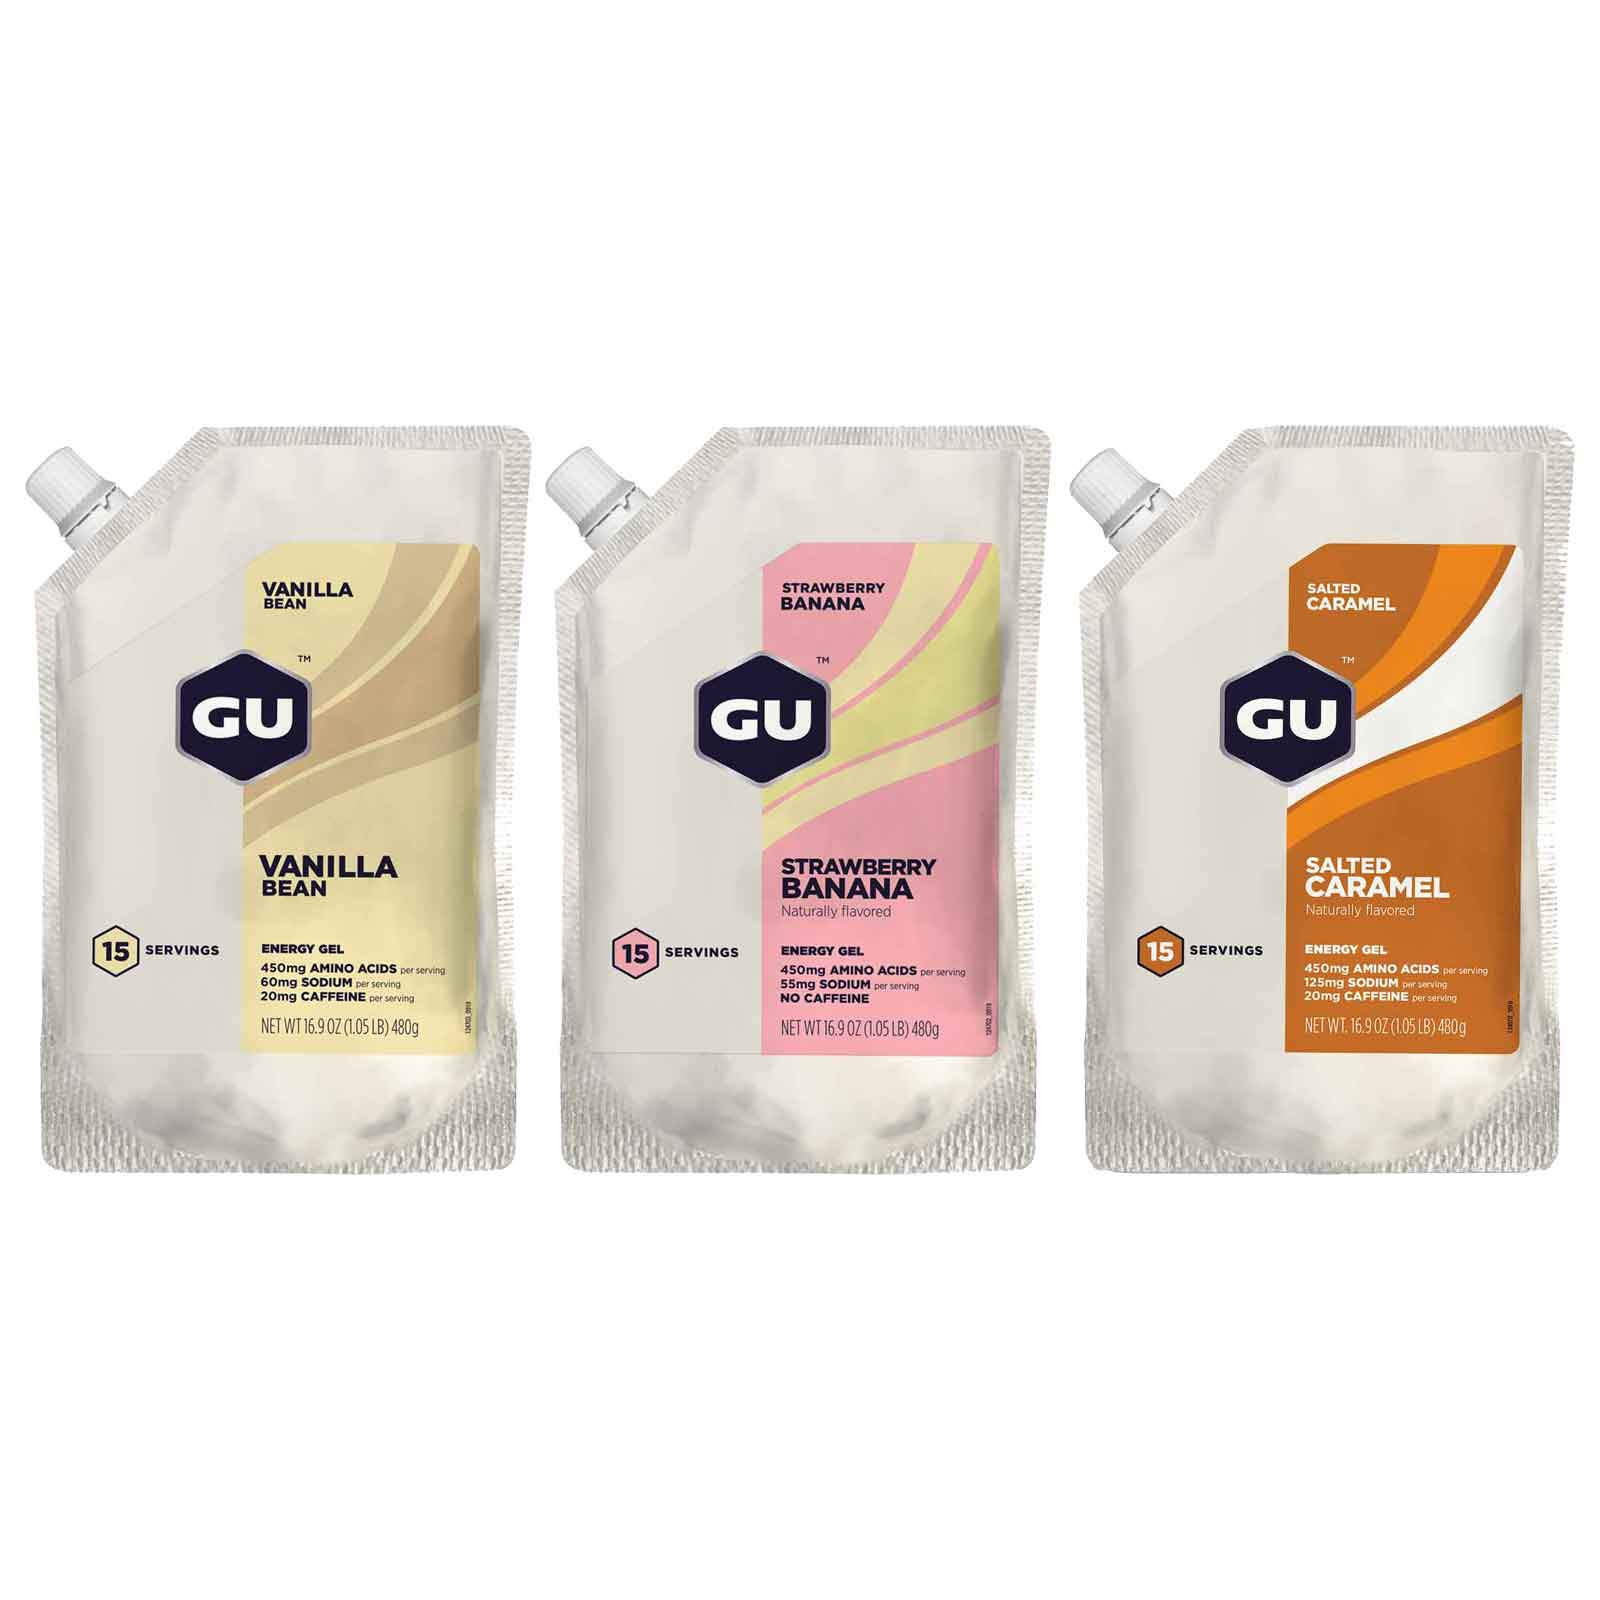 Picture of GU Energy Gel 15 Serving with Carbohydrates - 480g